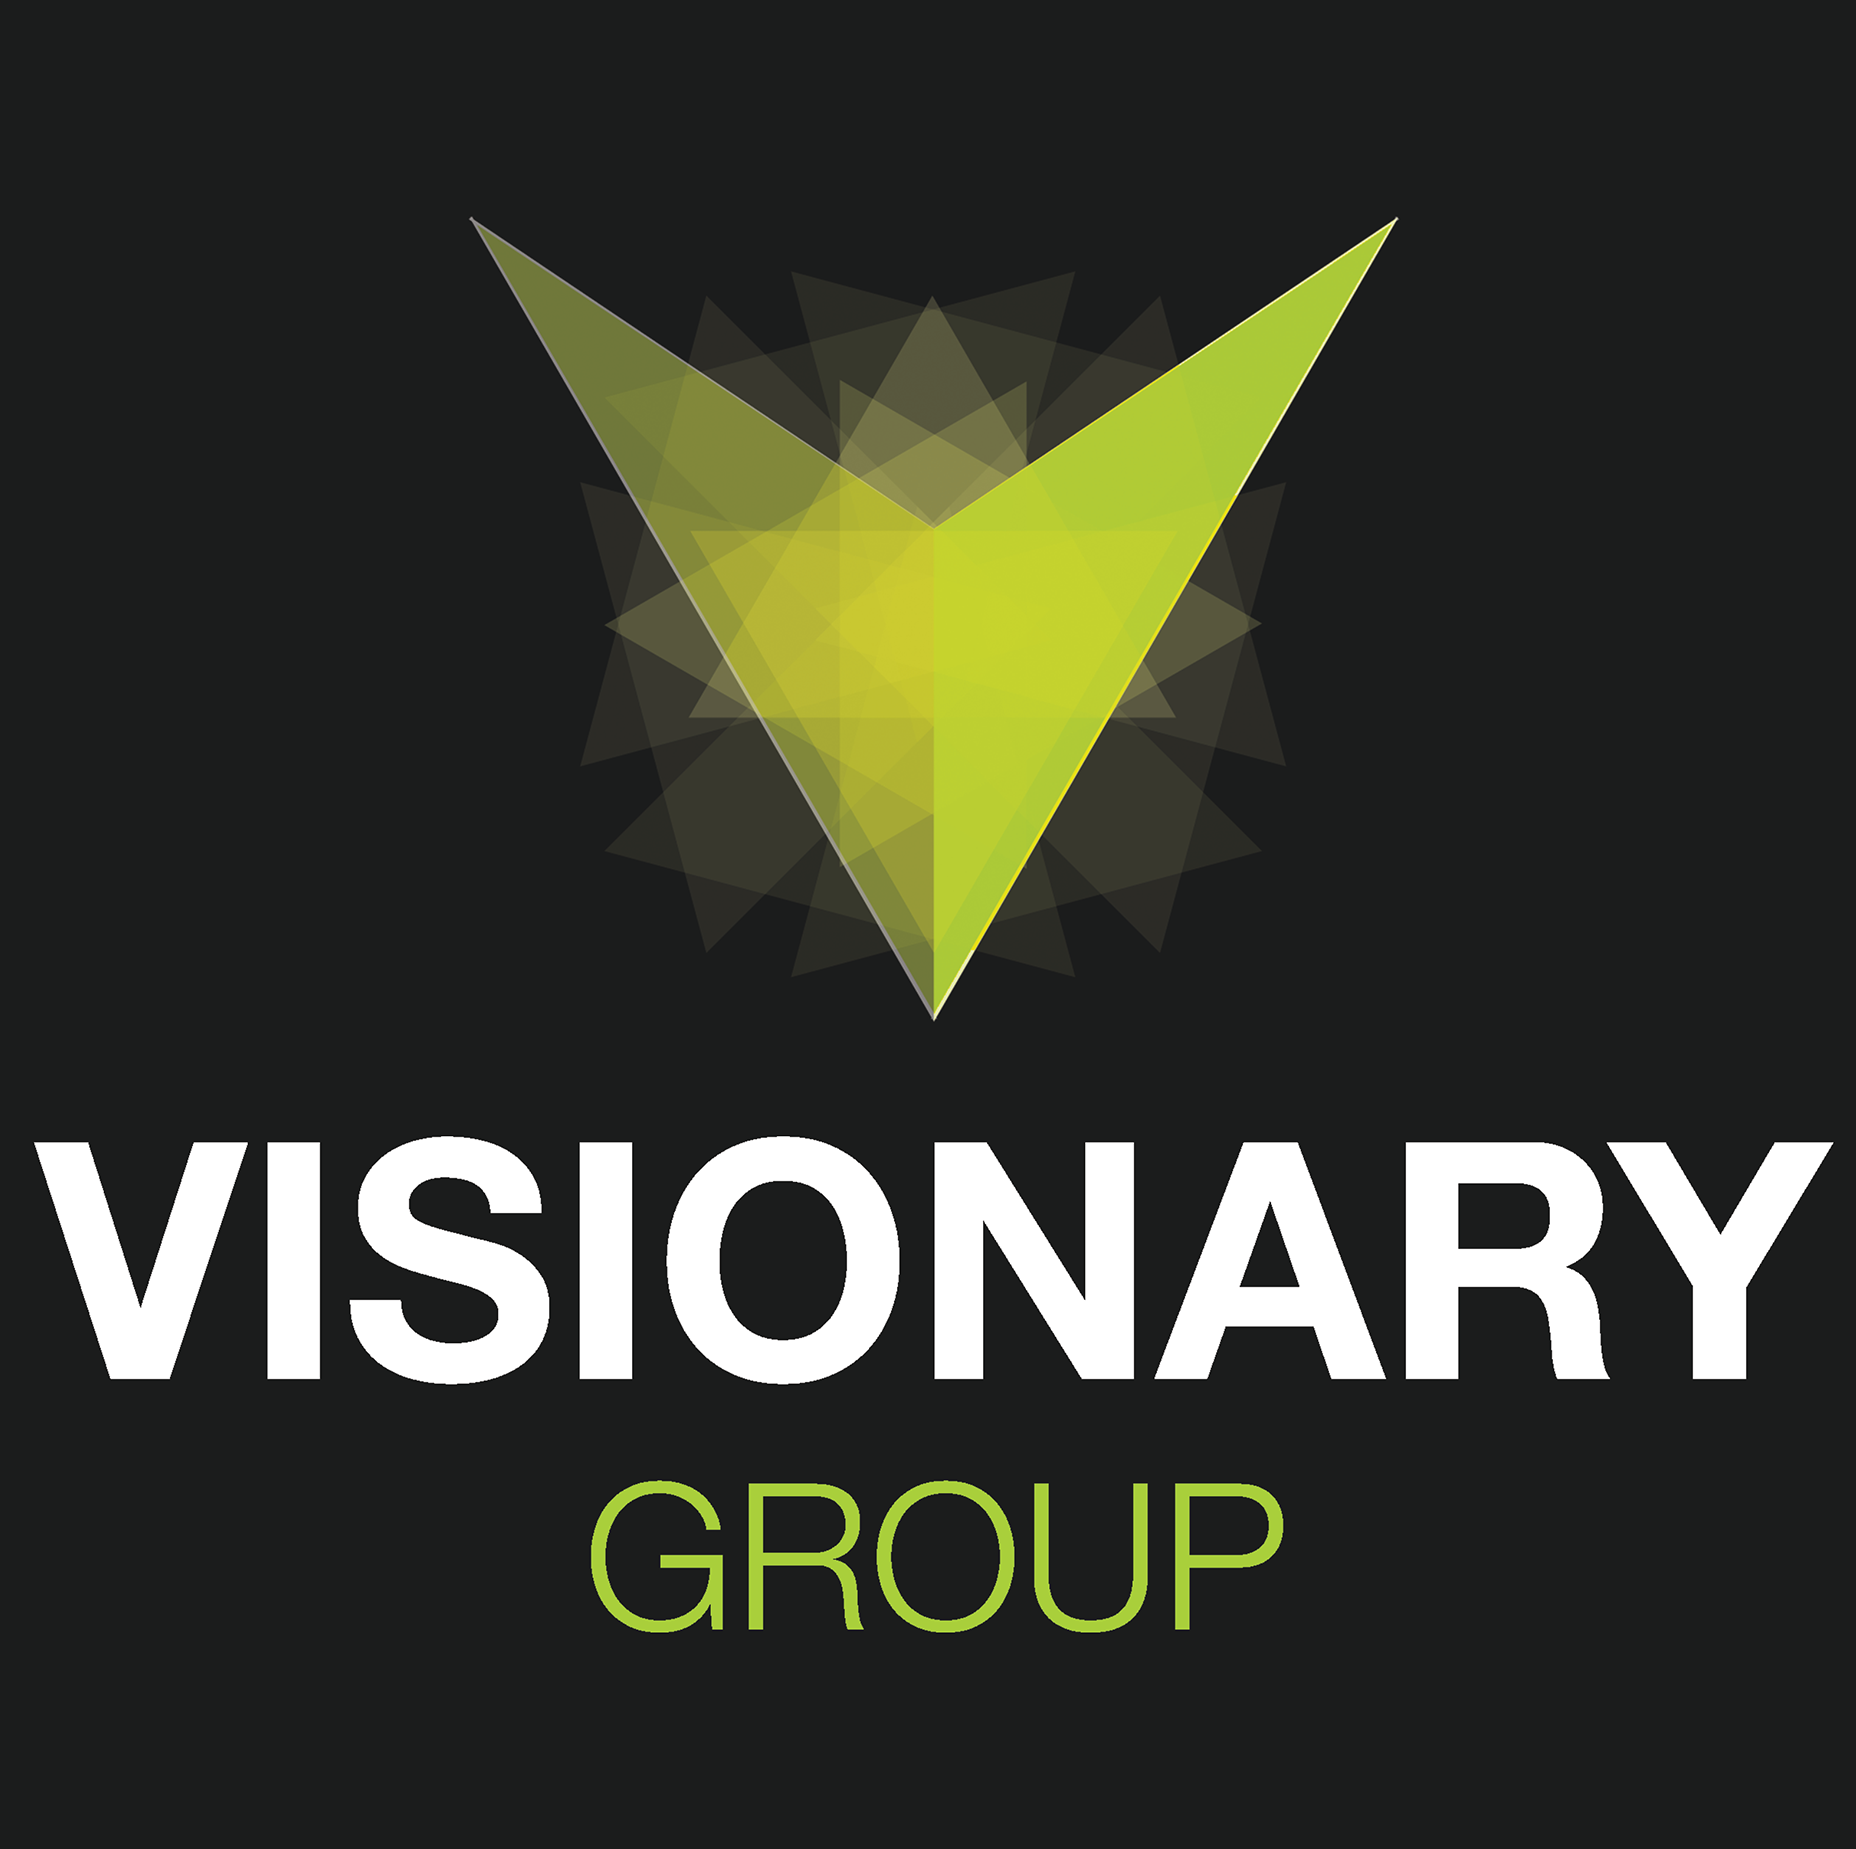 Visionary Group - Accelerating Business Growth